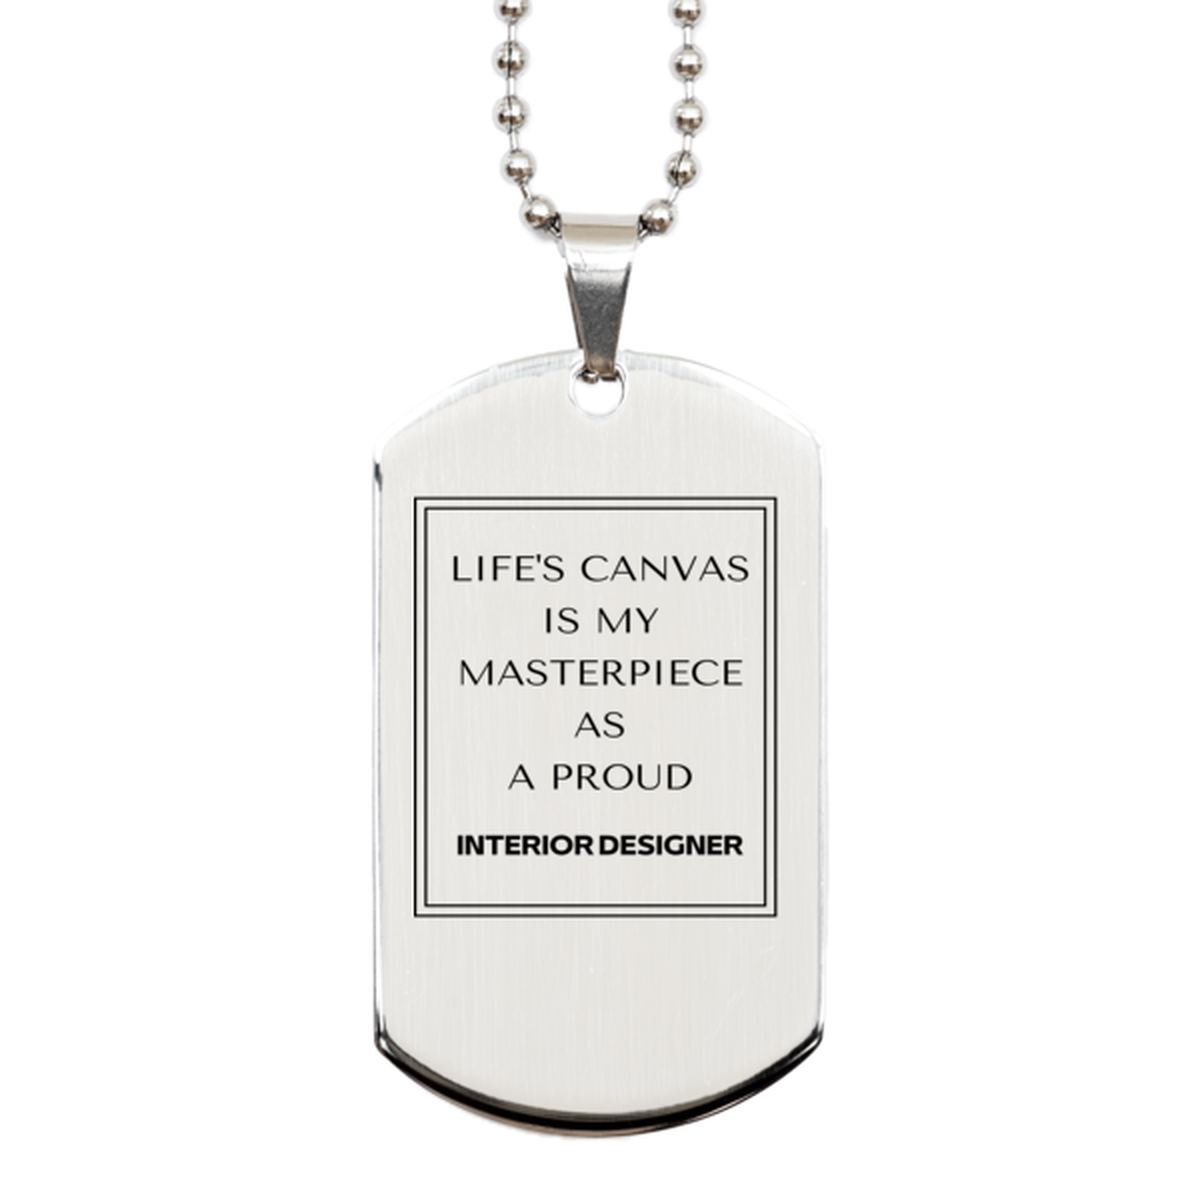 Proud Interior Designer Gifts, Life's canvas is my masterpiece, Epic Birthday Christmas Unique Silver Dog Tag For Interior Designer, Coworkers, Men, Women, Friends